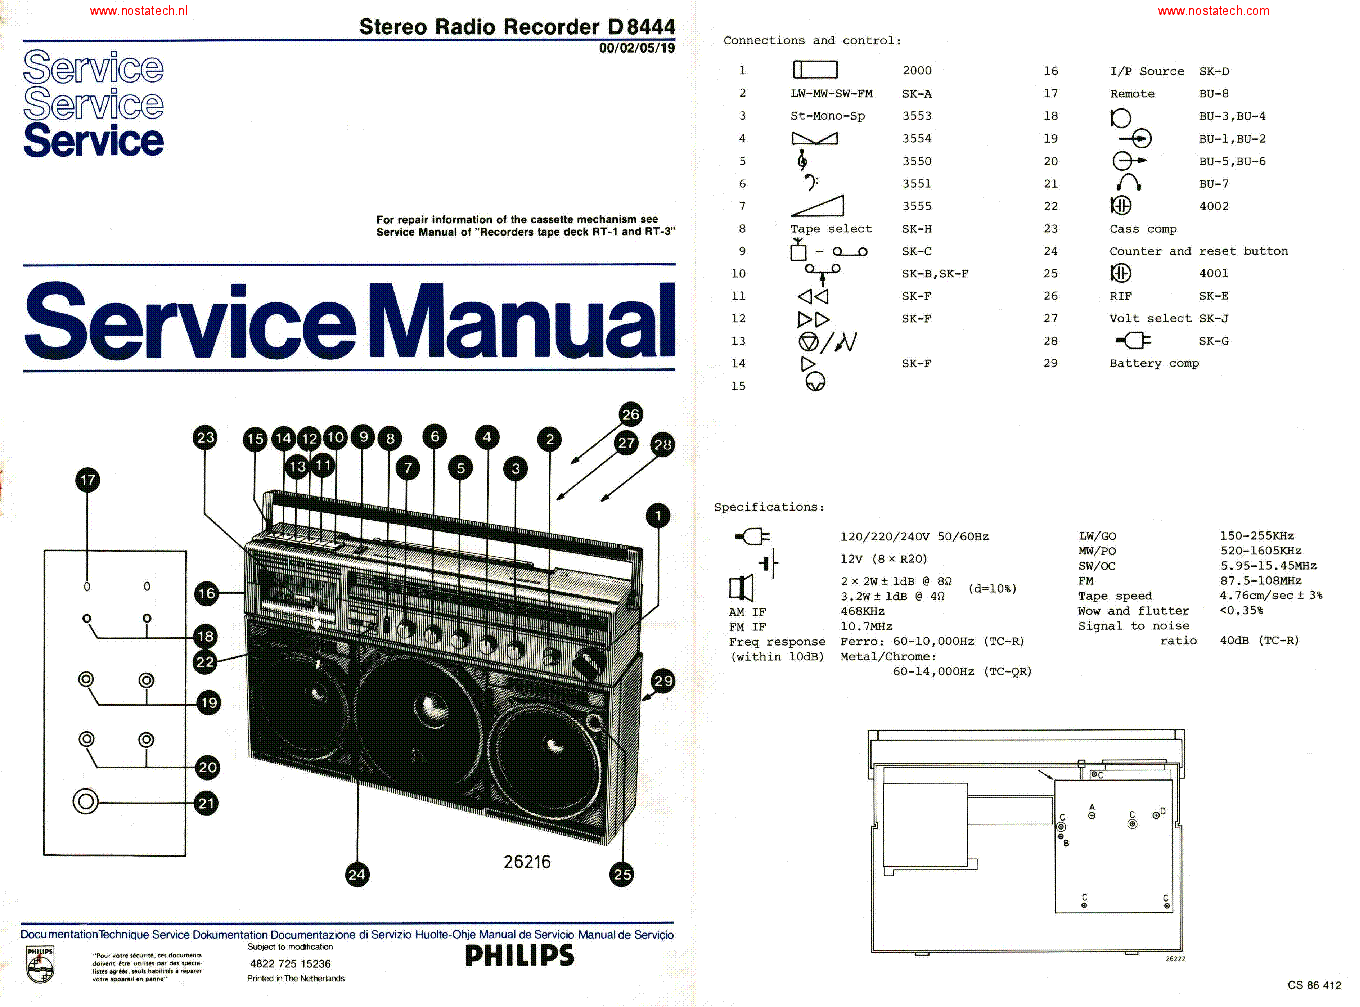 PHILIPS D8444-00-02-02-19 ORIG service manual (1st page)